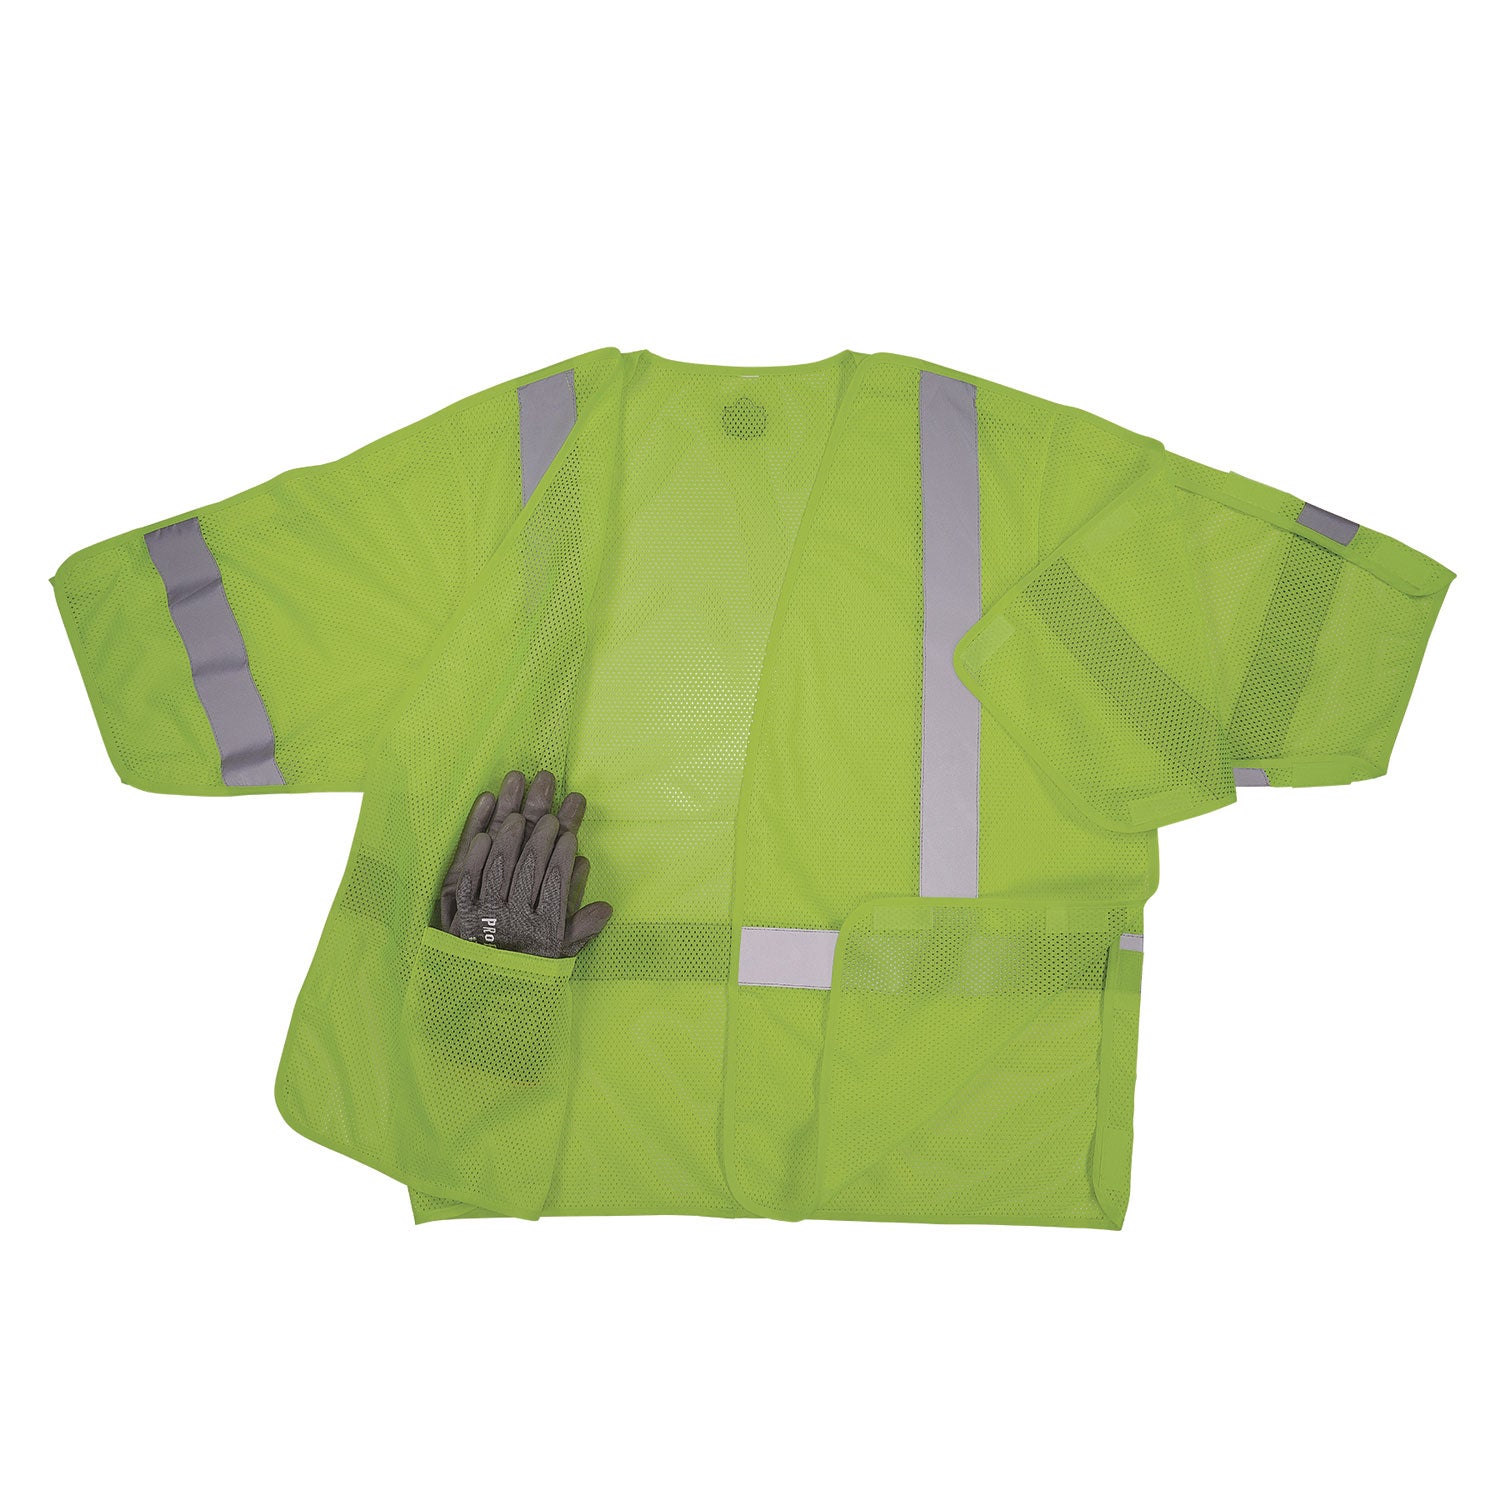 glowear-8315ba-class-3-hi-vis-breakaway-safety-vest-4x-large-to-5x-large-lime-ships-in-1-3-business-days_ego23059 - 2